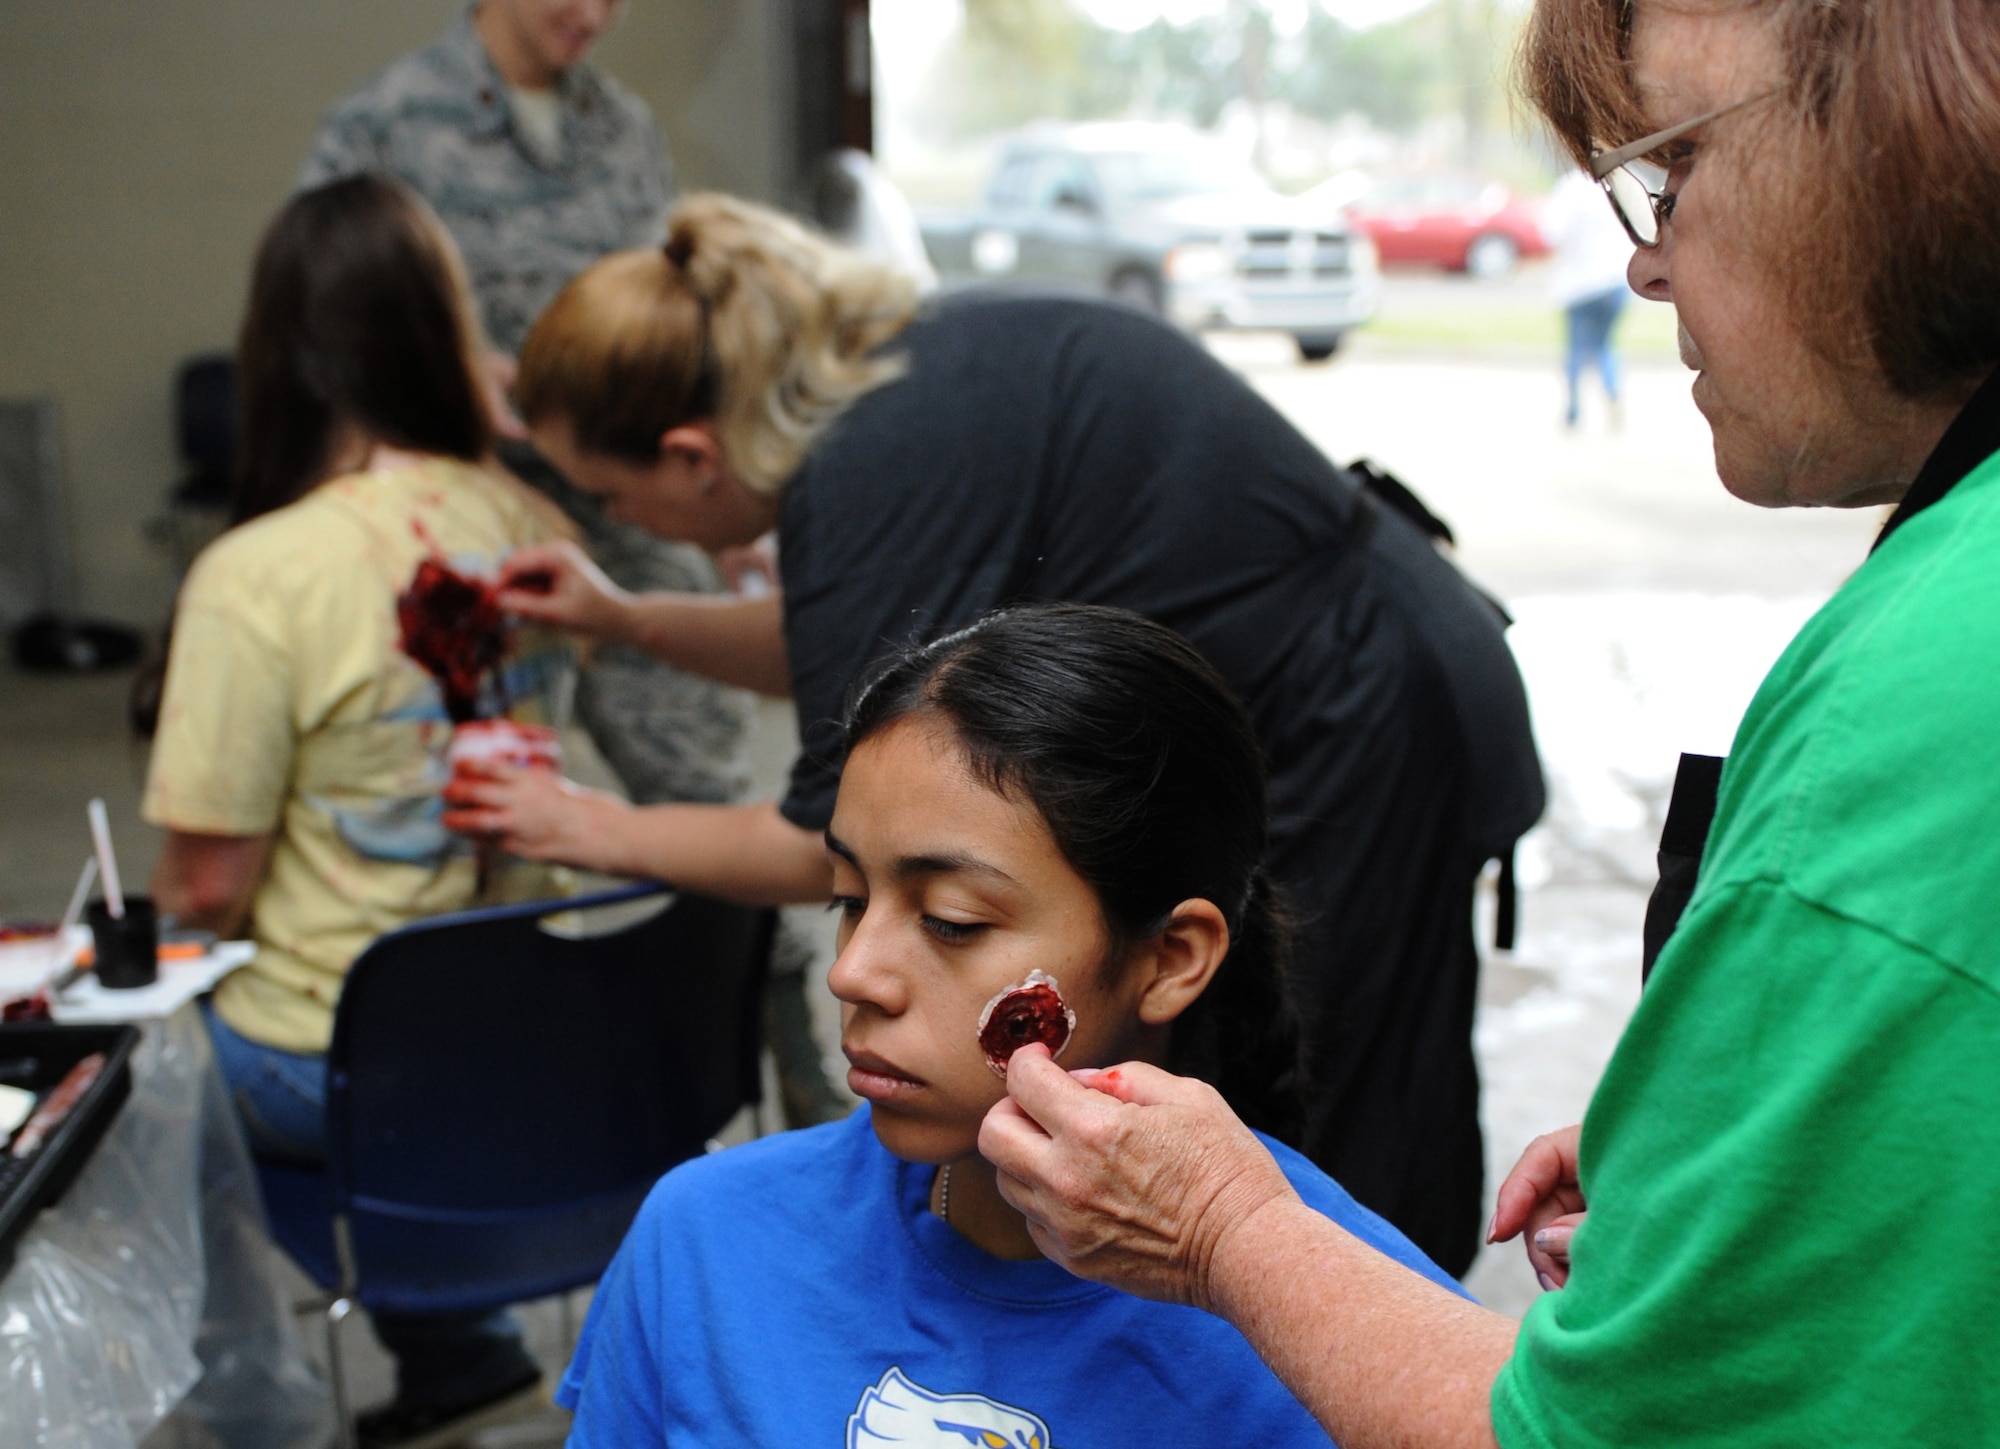 Regina Parker, 81st Medical Operations Squadron administrator, applies moulage to Airman 1st Class Lupita Lopez, 81st Inpatient Operation Squadron medical technician, at the Keesler medical warehouse Mar. 17, 2016, Keesler Air Force Base, Miss. Lopez portrayed a wounded person during a base active shooter exercise where an active duty Air Force member simulated opening fire at the Keesler Medical Center. The exercise tested the base's ability to respond to and recover from a mass casualty event. (U.S. Air Force photo by Kemberly Groue)